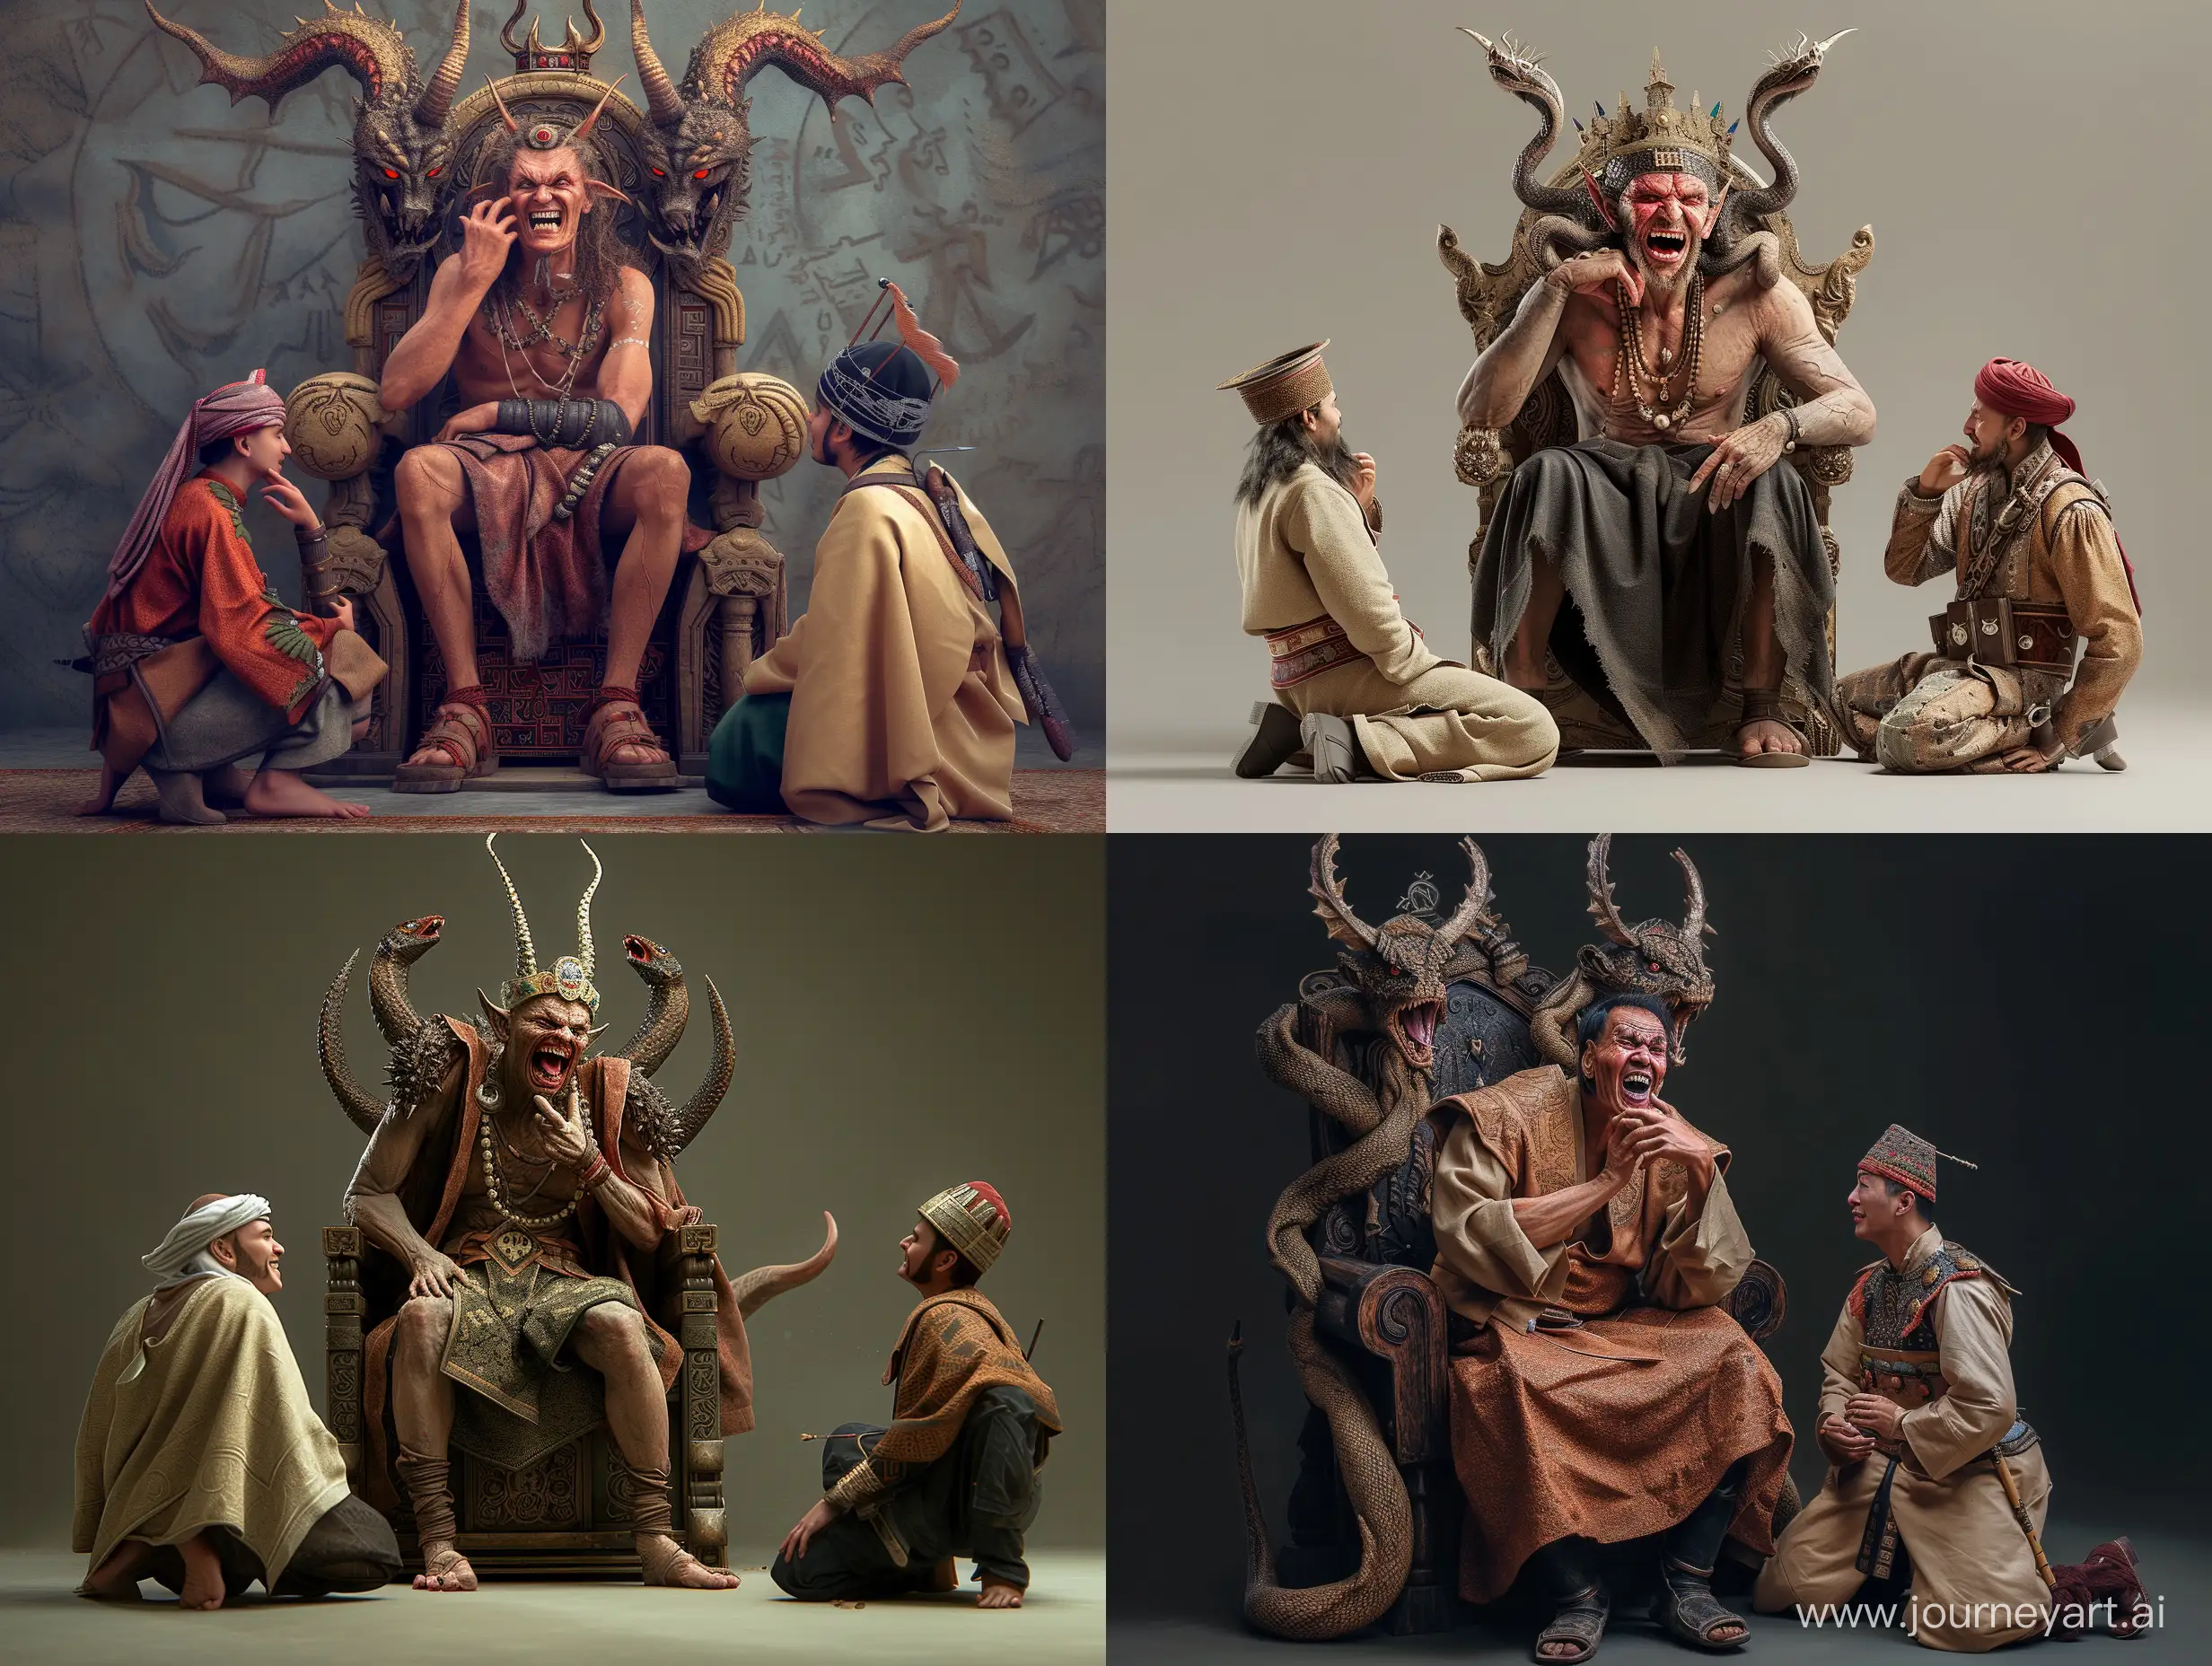 An ancient demonic king with a serpent's head protruding from each shoulder sits on a king's throne with a two-horned crown and a hand under his chin, laughing menacingly, talking to two soldiers kneeling in front of his seat.  One of his soldiers kneeling on the right side is wearing Arabic clothes and the other soldier is wearing Mongolian clothes. Make a realistic photo